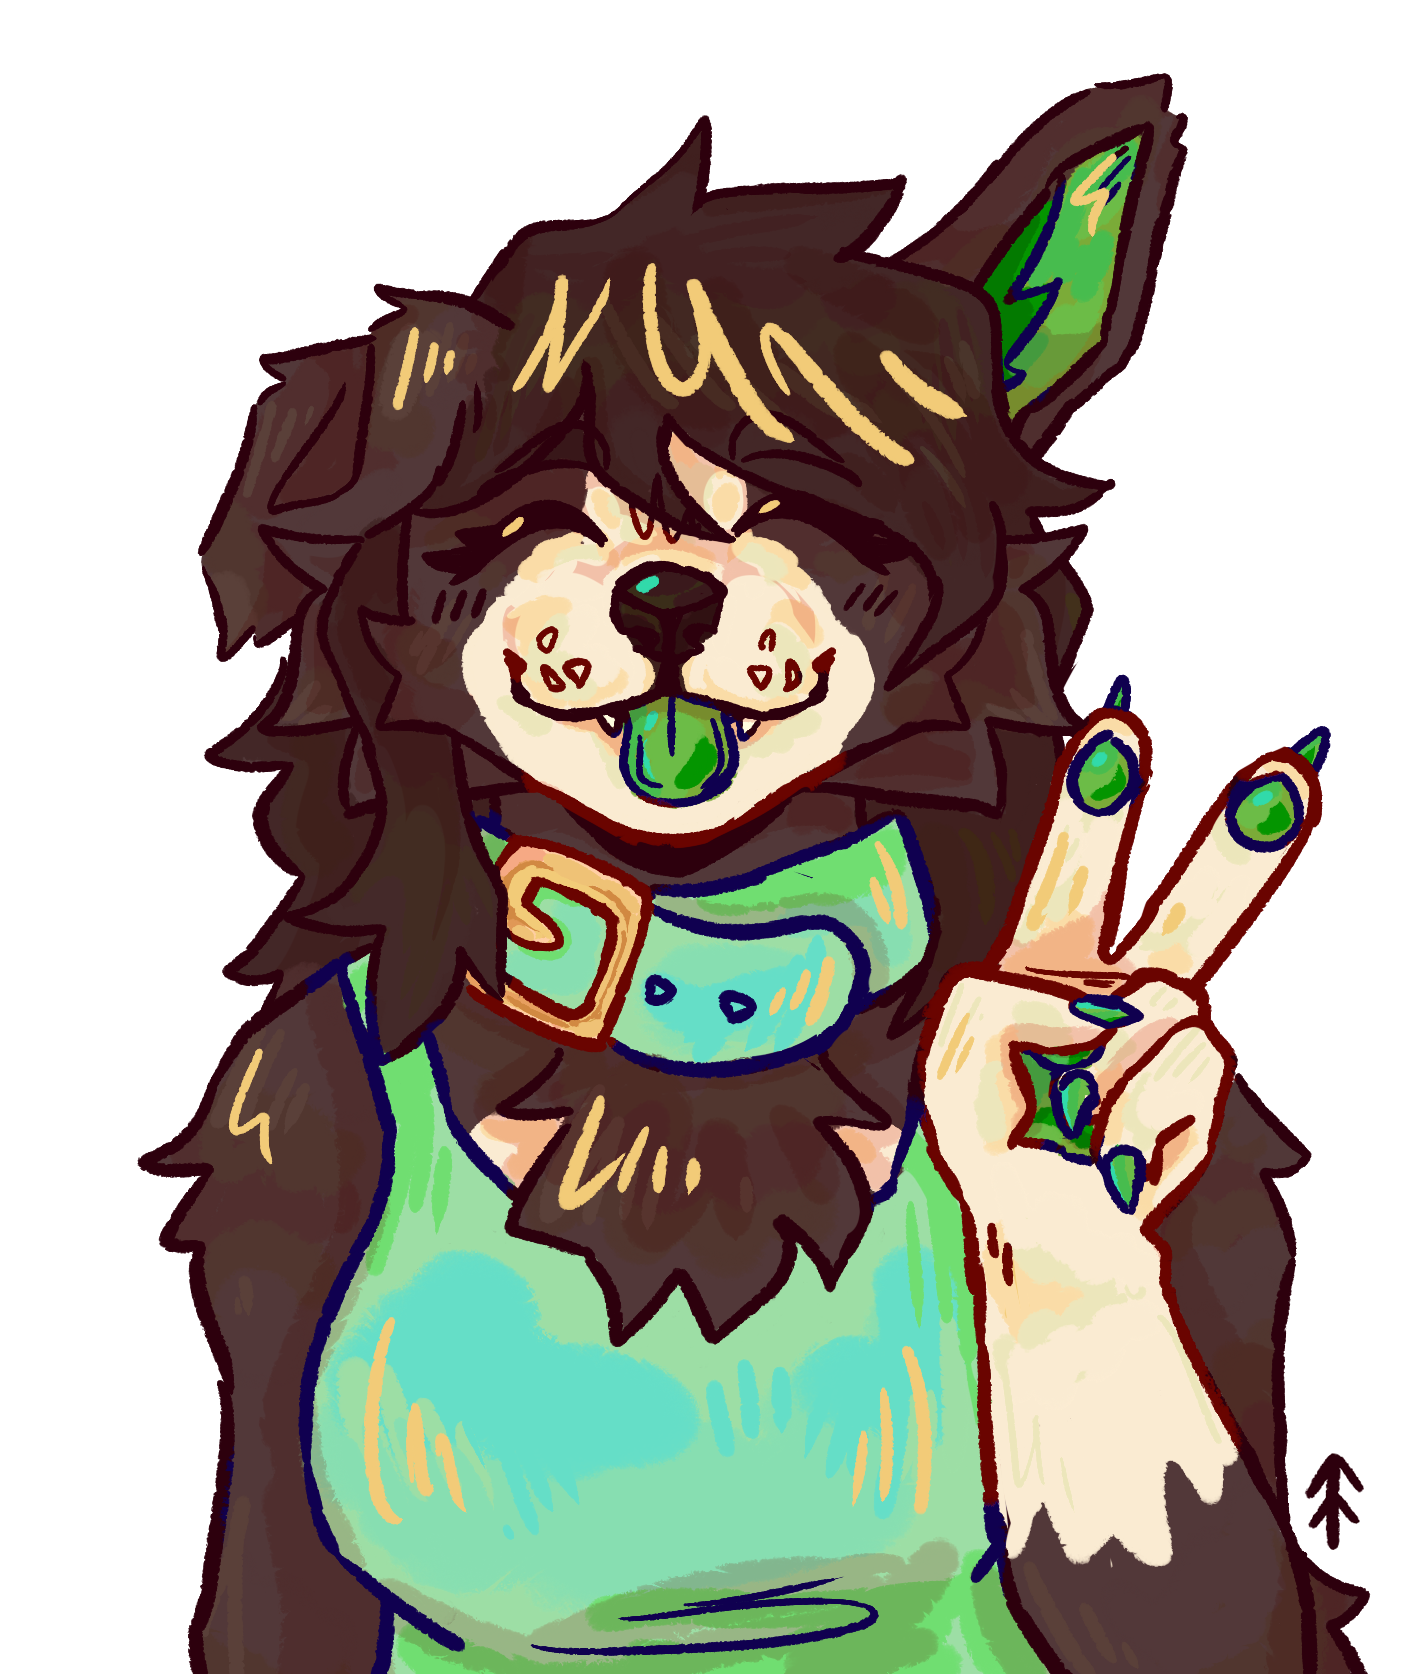 ID: A drawing of my fursona. She is a black-and-white border collie girl with green ears and a green tongue. She is giving a peace sign with her eyes closed and her tongue sticking out. She is wearing a green tanktop and collar. End ID.